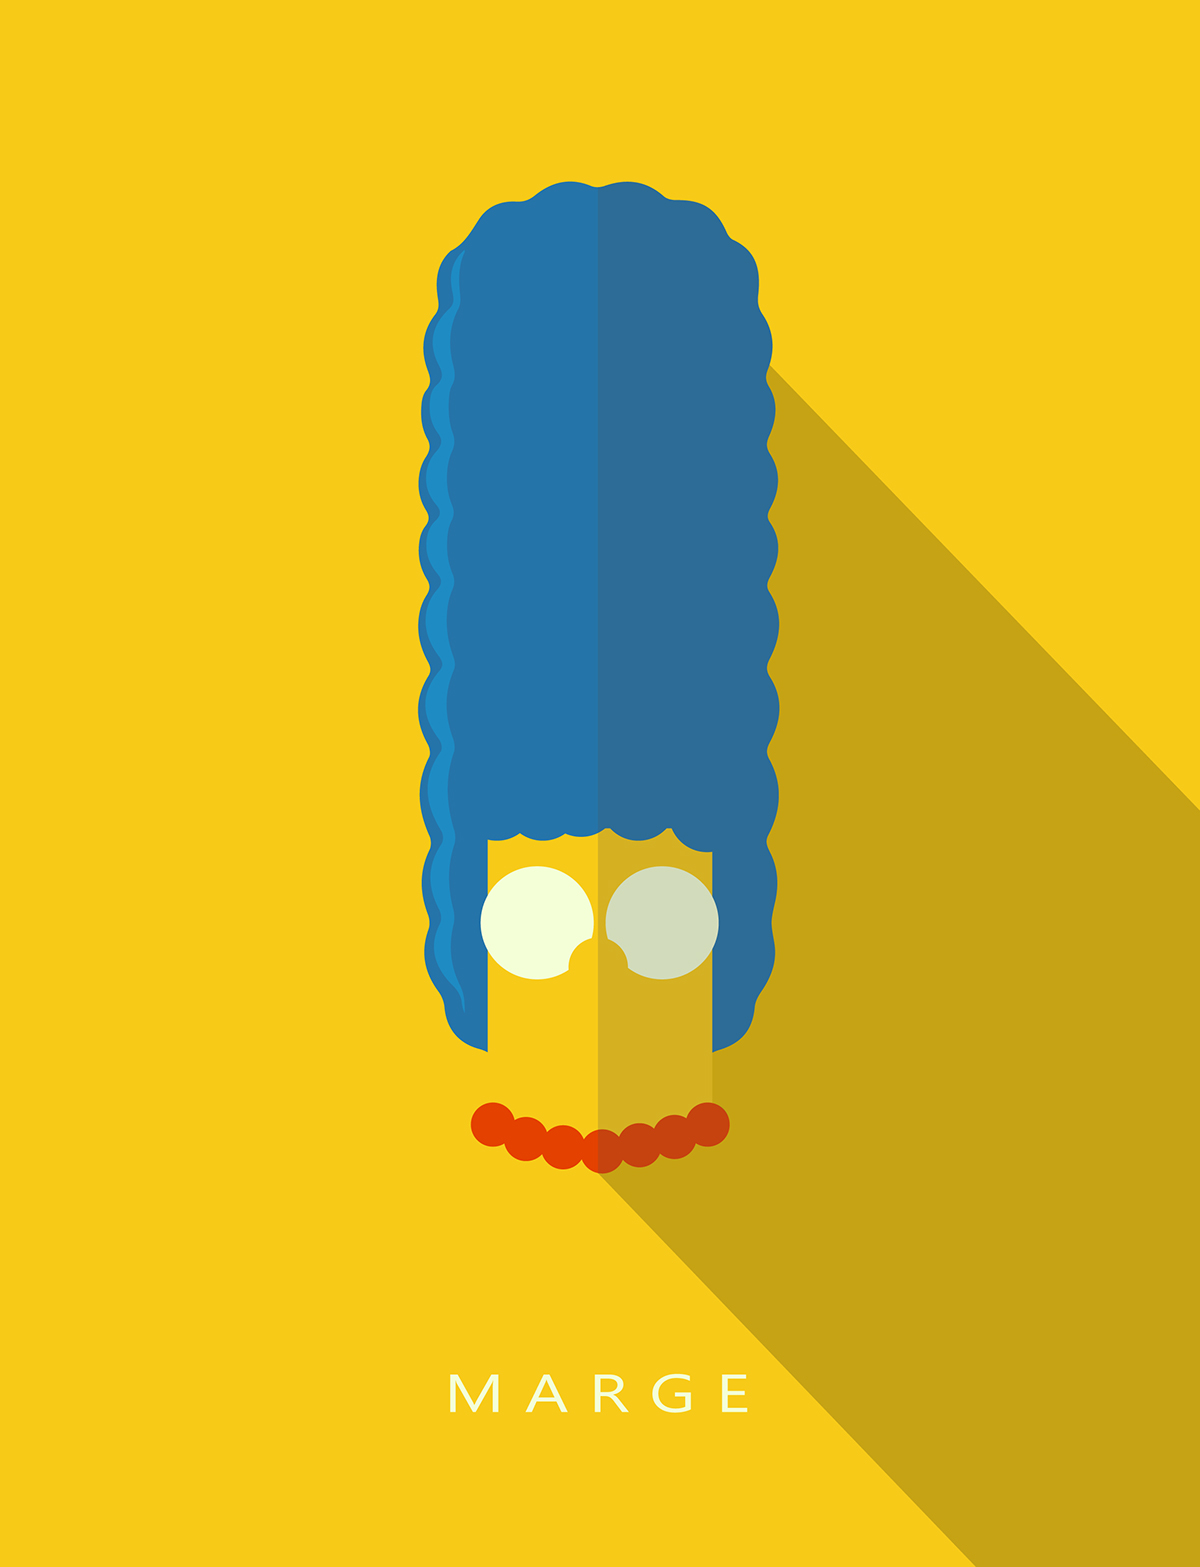 #simpsons #marge #Poster